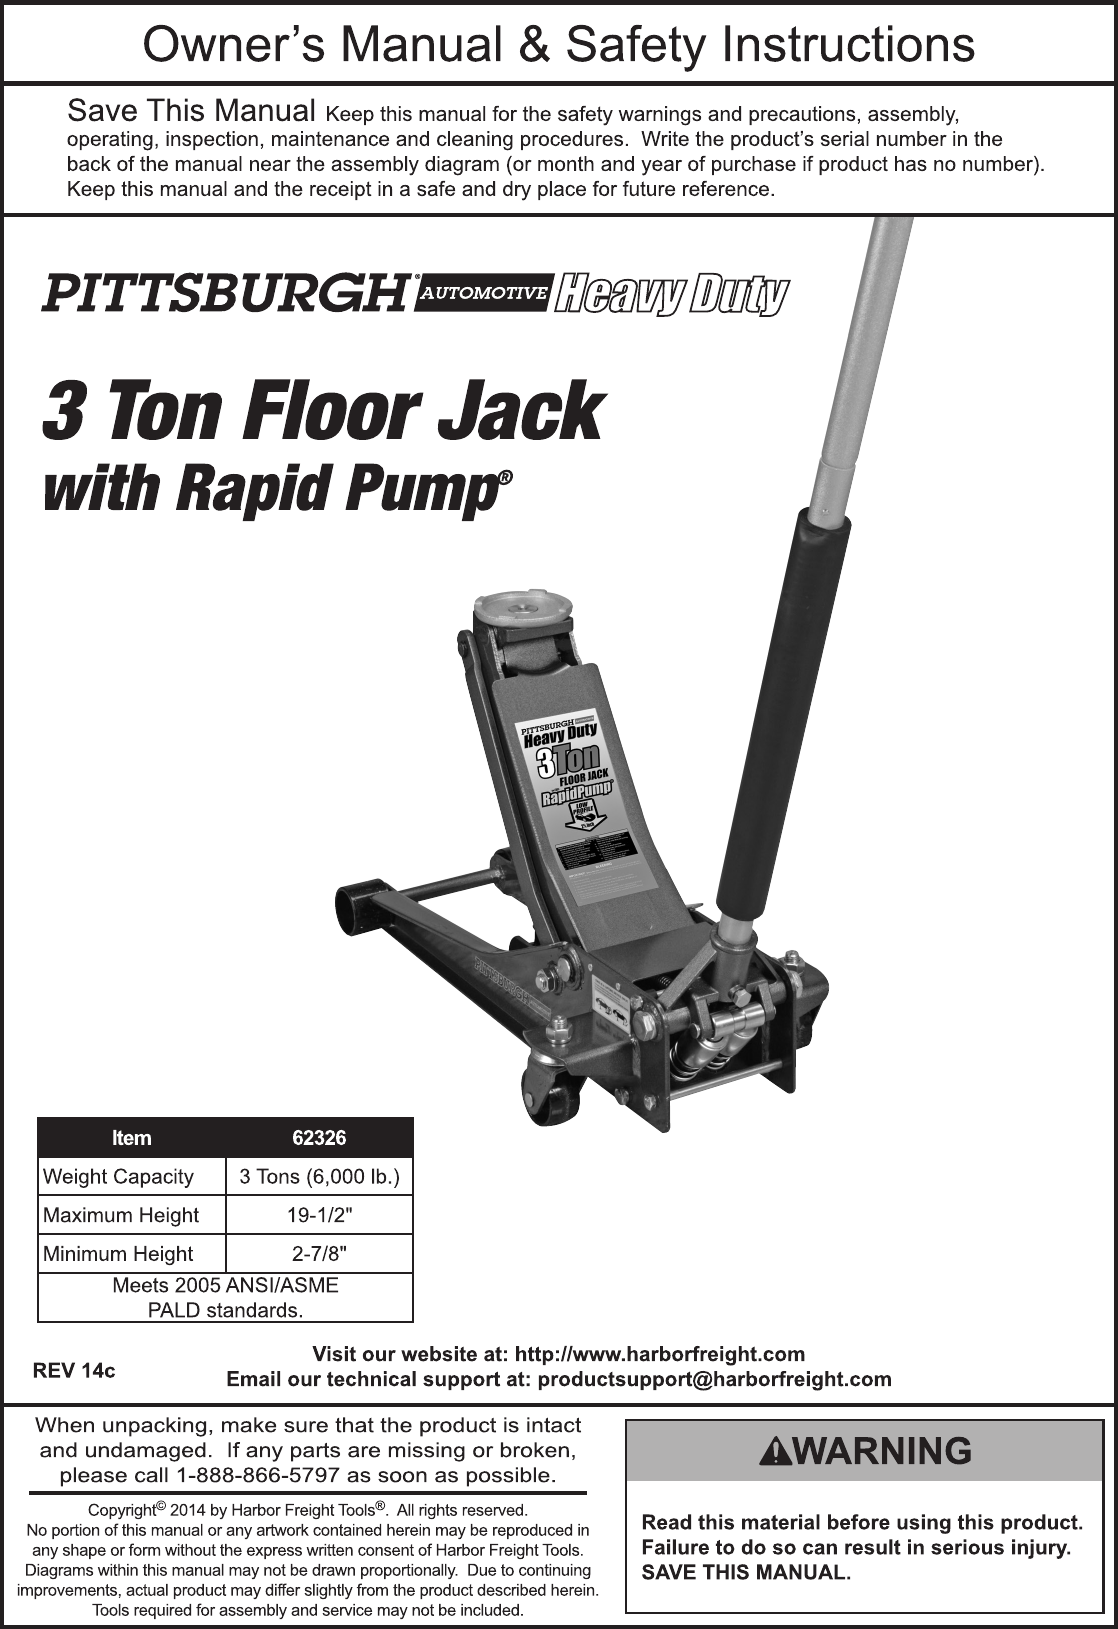 Manual For The 62326 3 Ton Low Profile Steel Heavy Duty Floor Jack With  Rapid Pump®